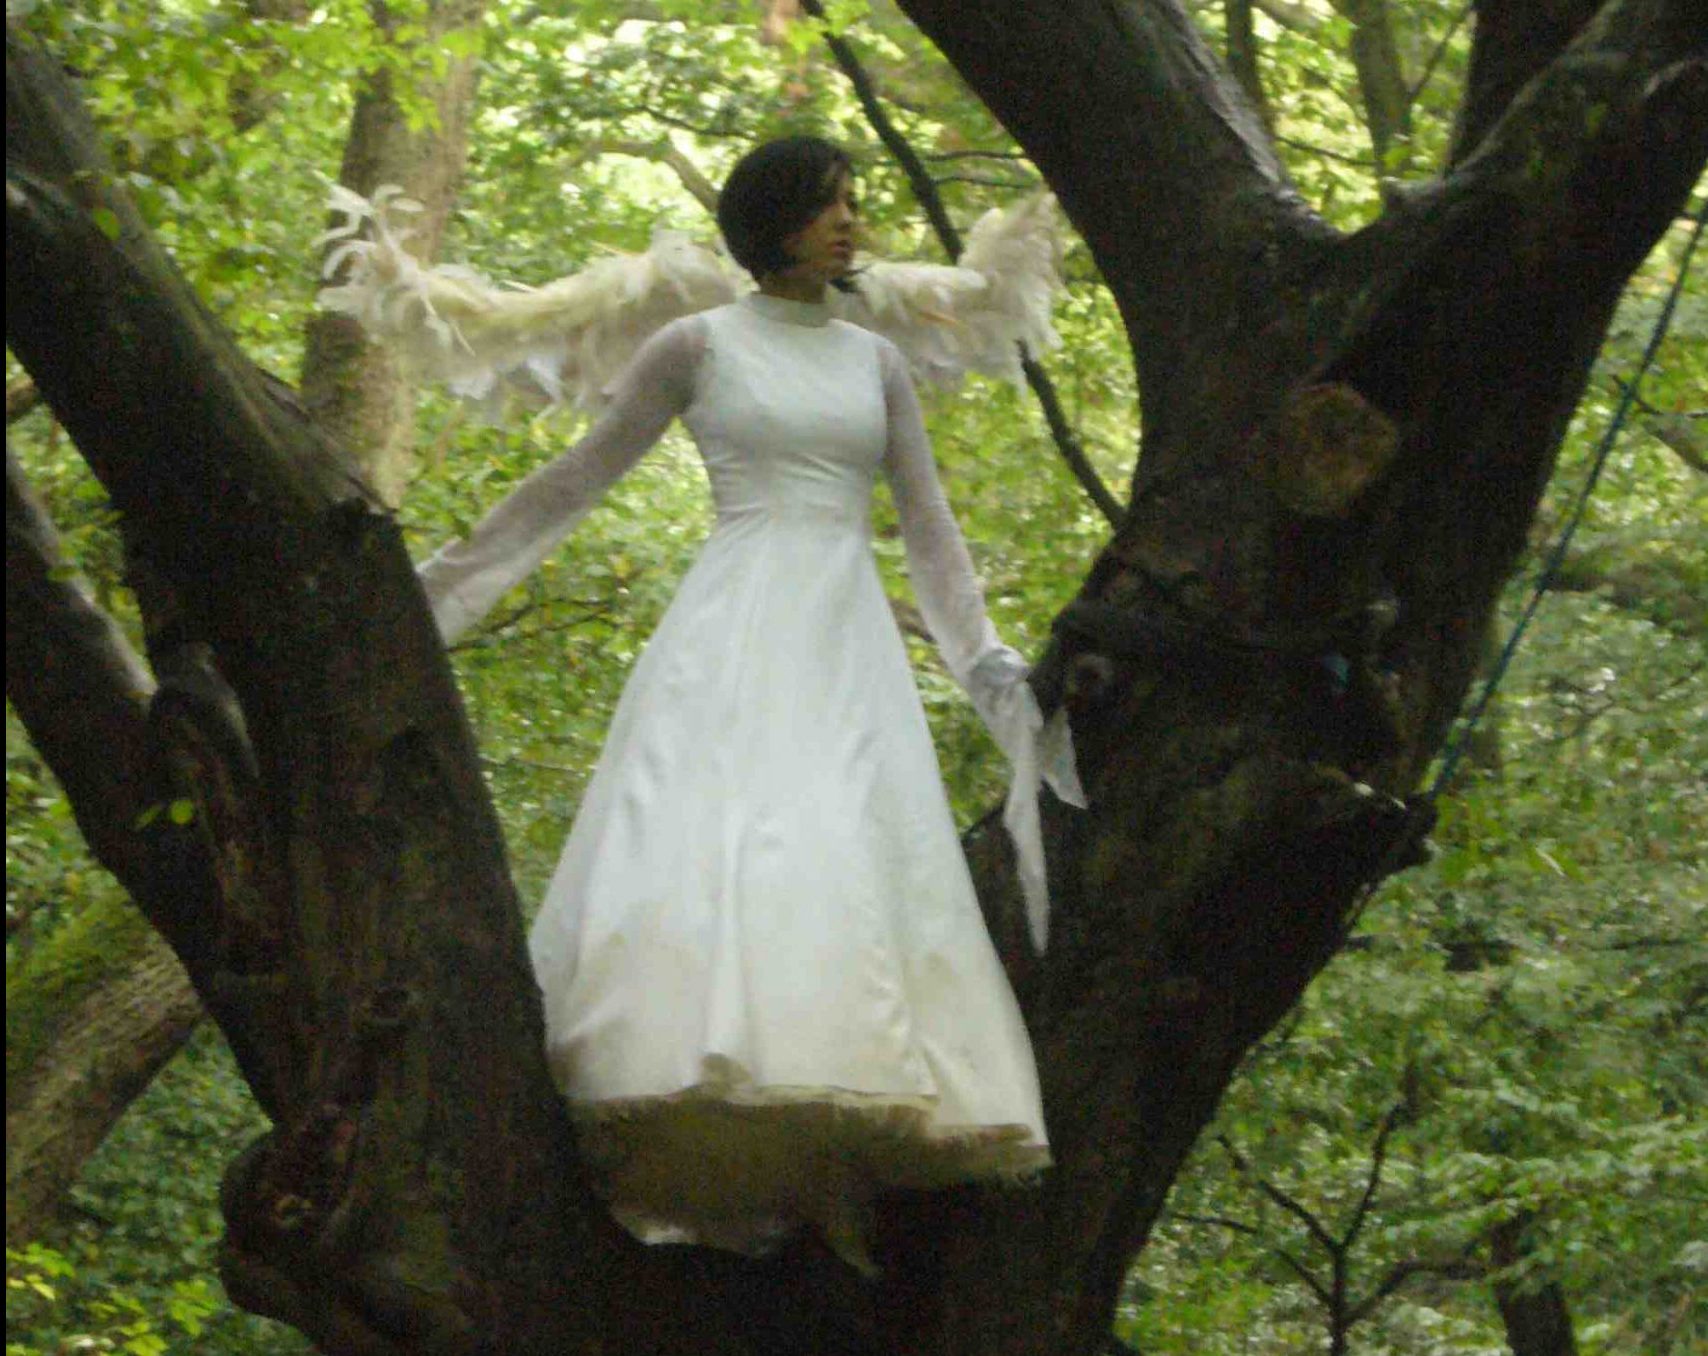 performer in angelic white costume stands in a large tree